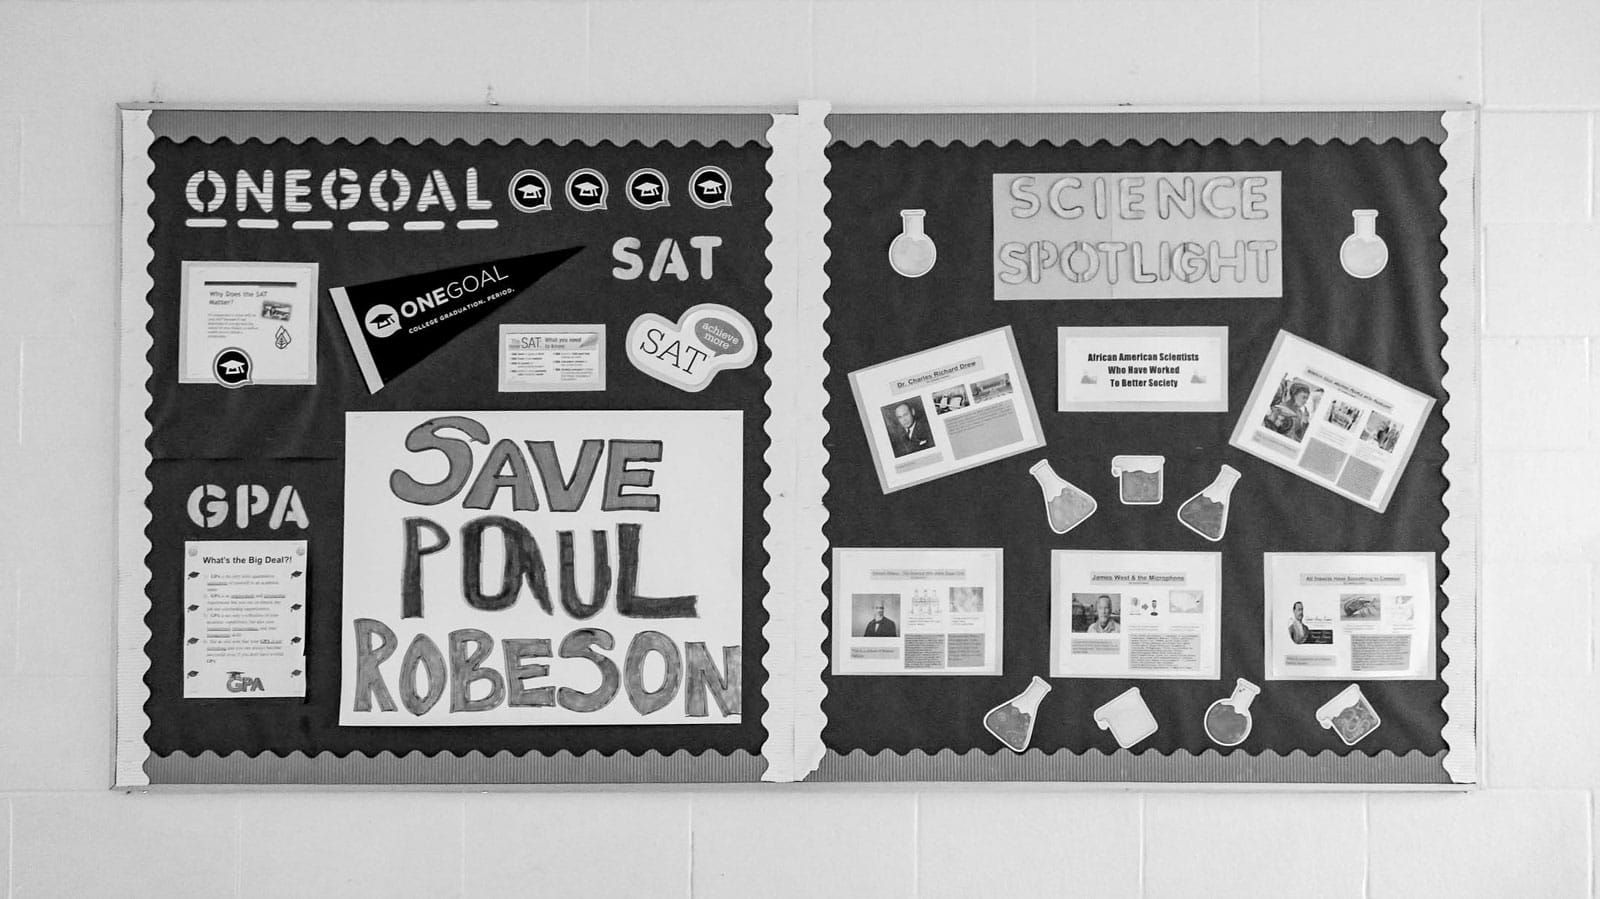 Pinboard with sign that reads 'Save Paul Robeson'